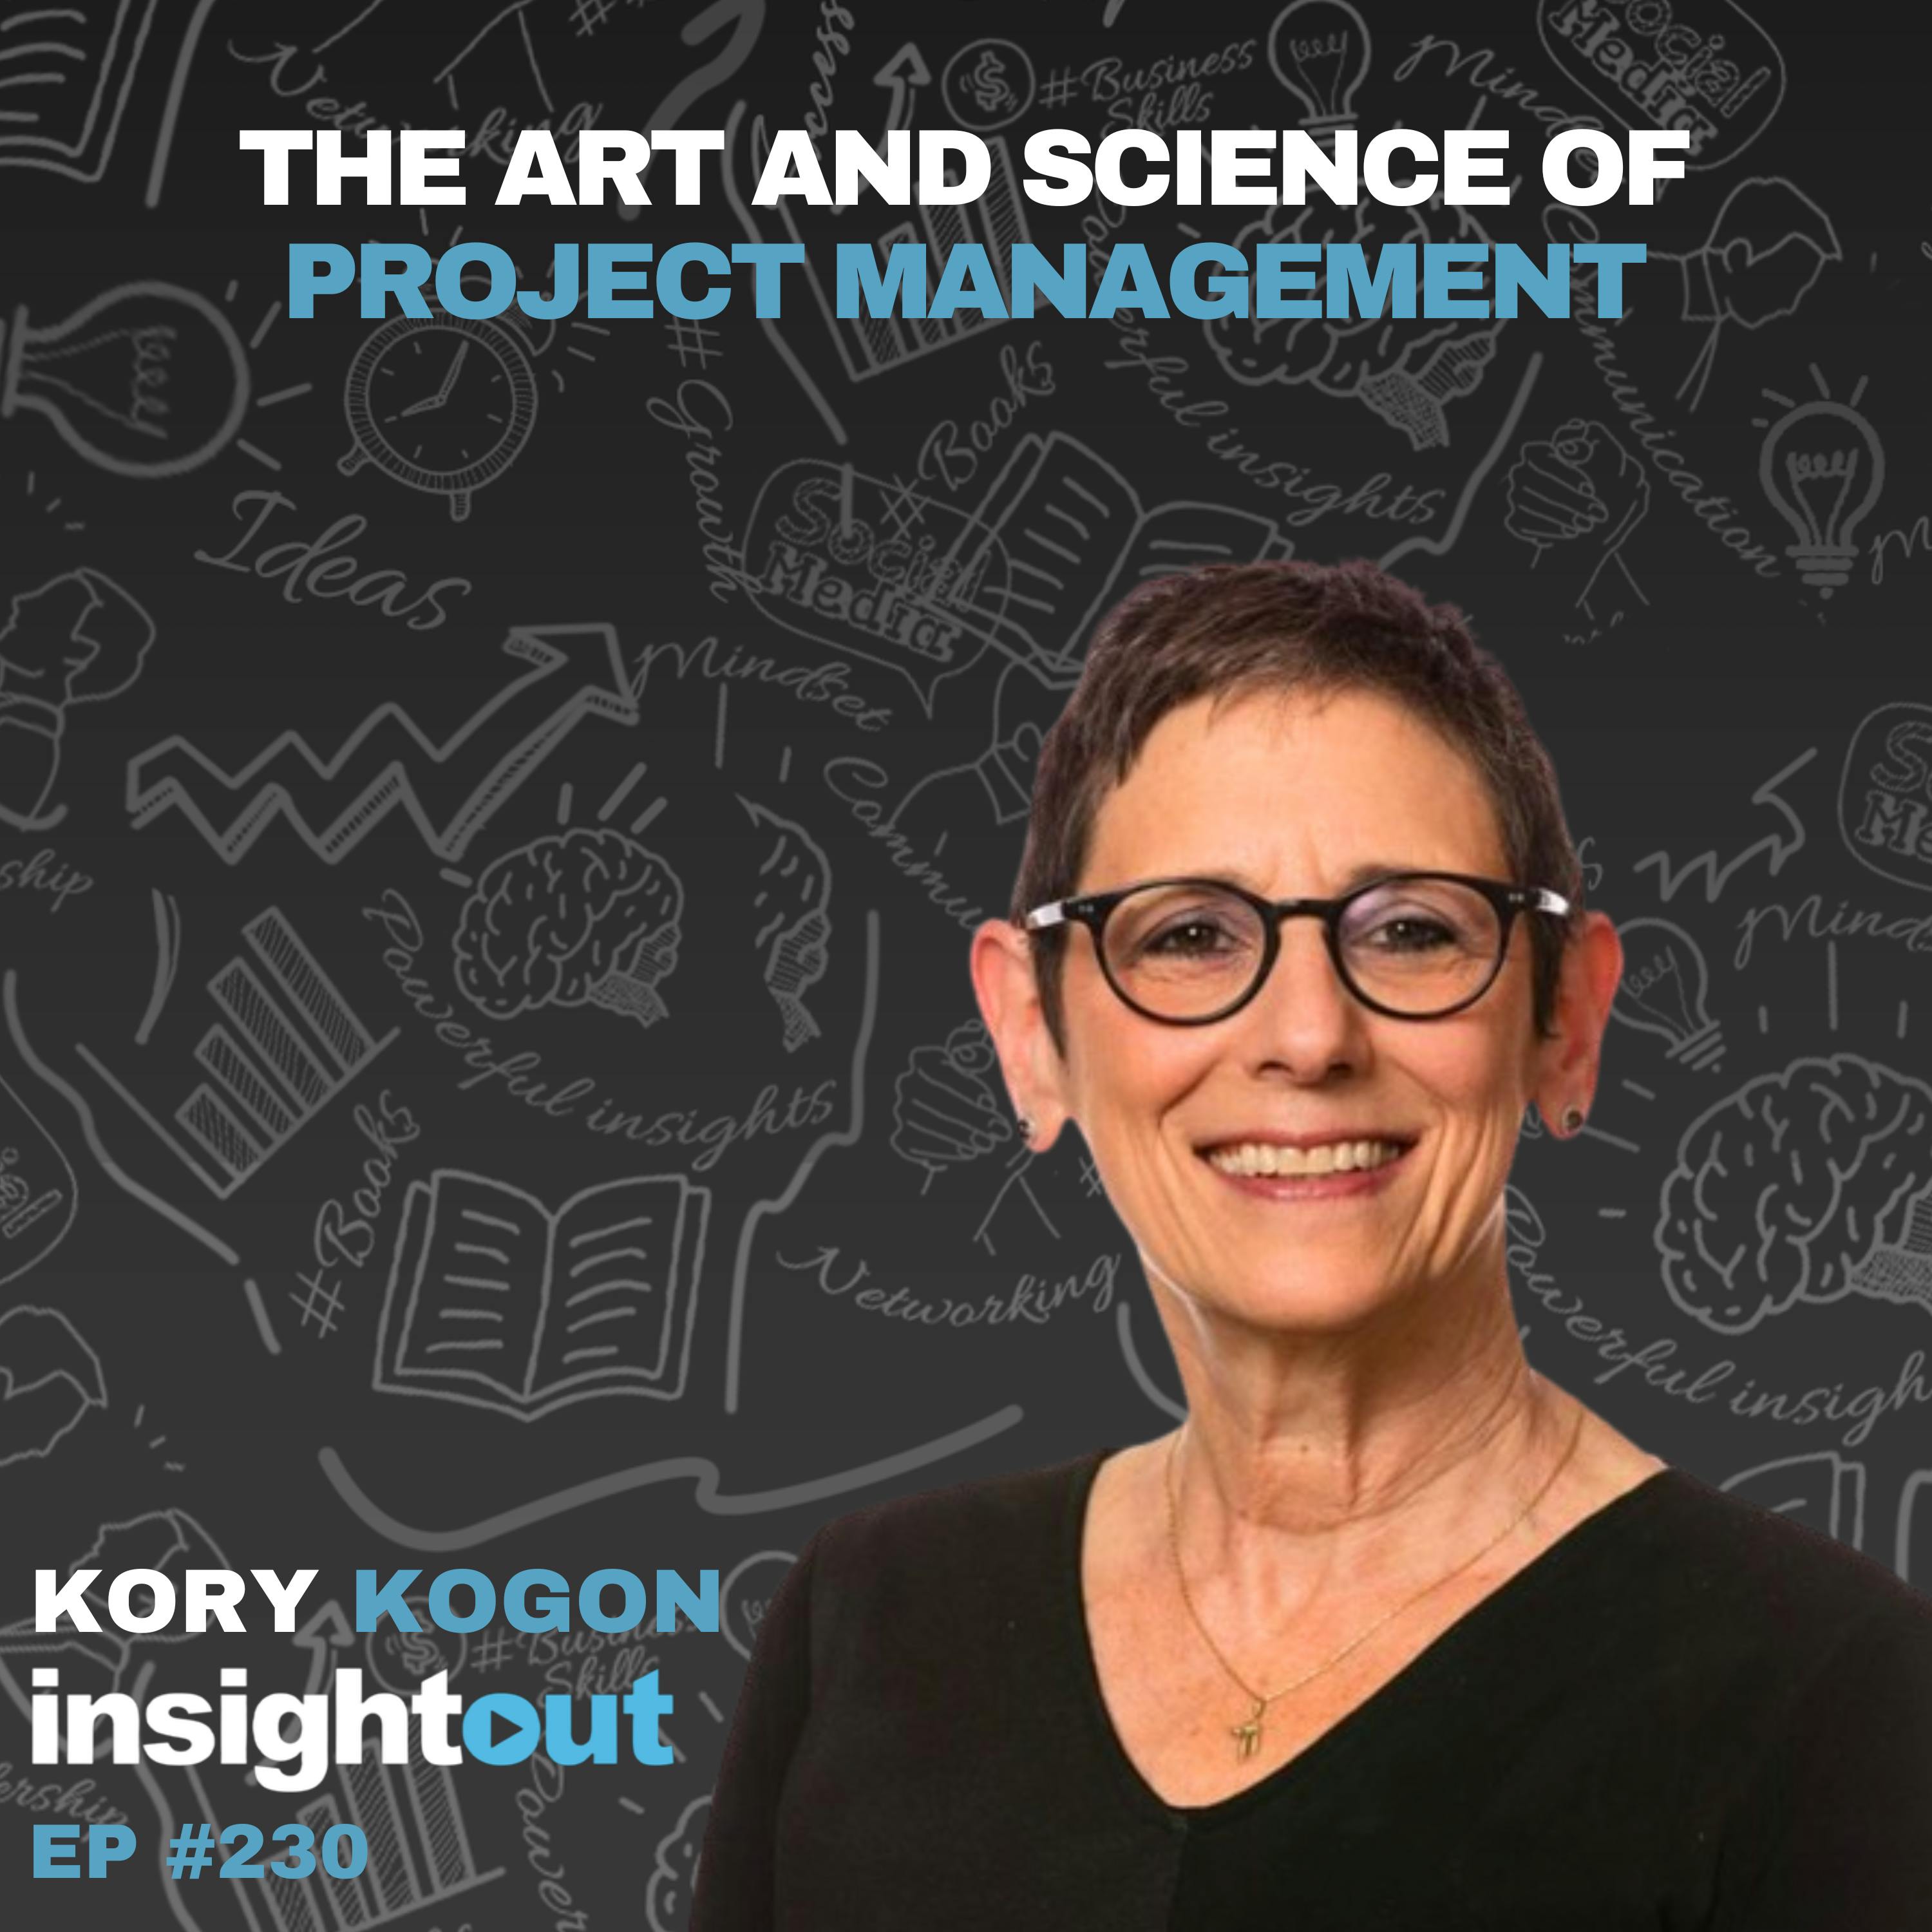 The Art and Science of Project Management with Kory Kogon